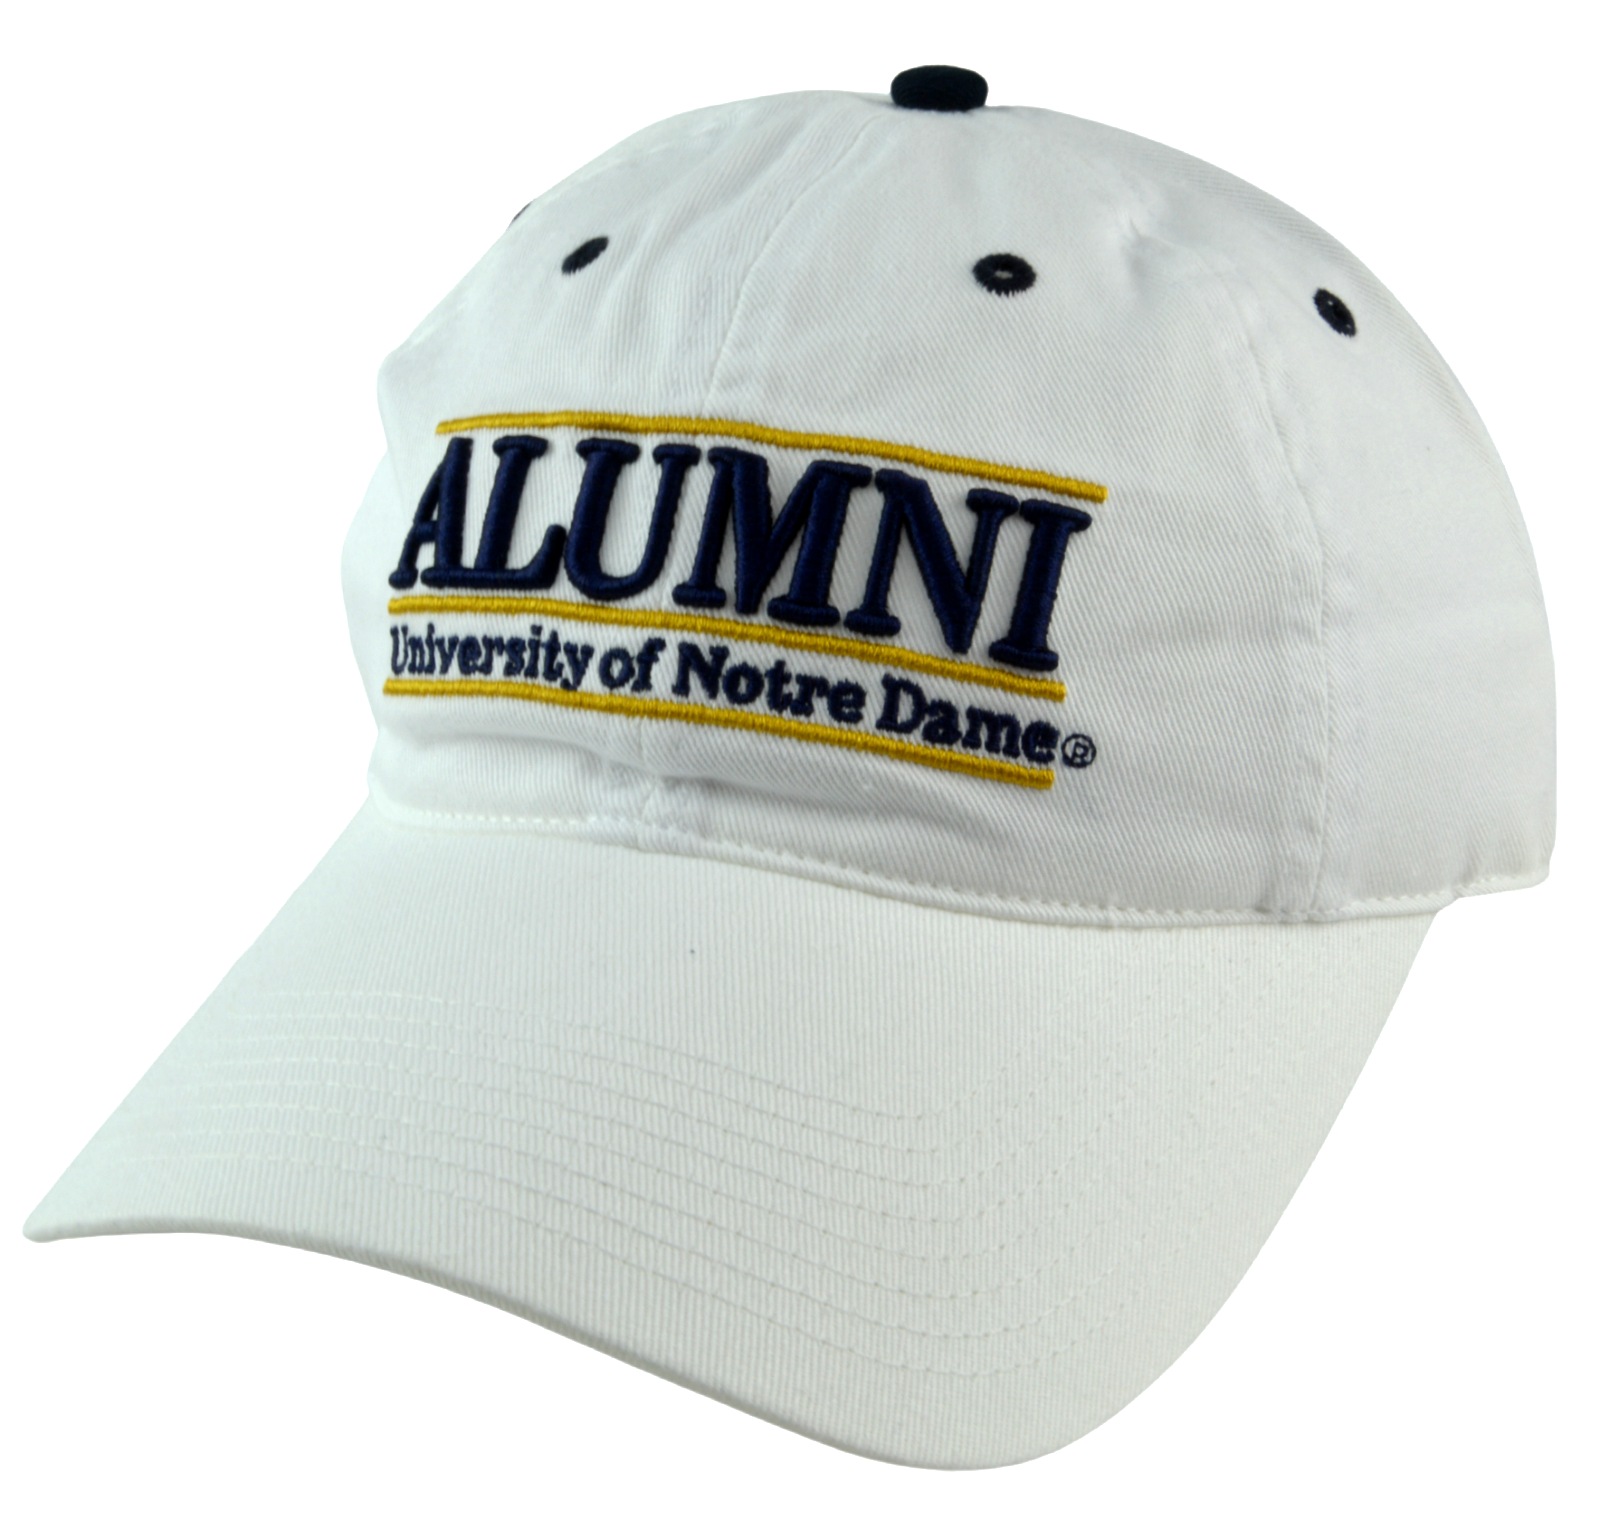 Primary image for Notre Dame Fighting Irish Alumni 3 Bar Relaxed Fit Adjustable White Cap Dad Hat